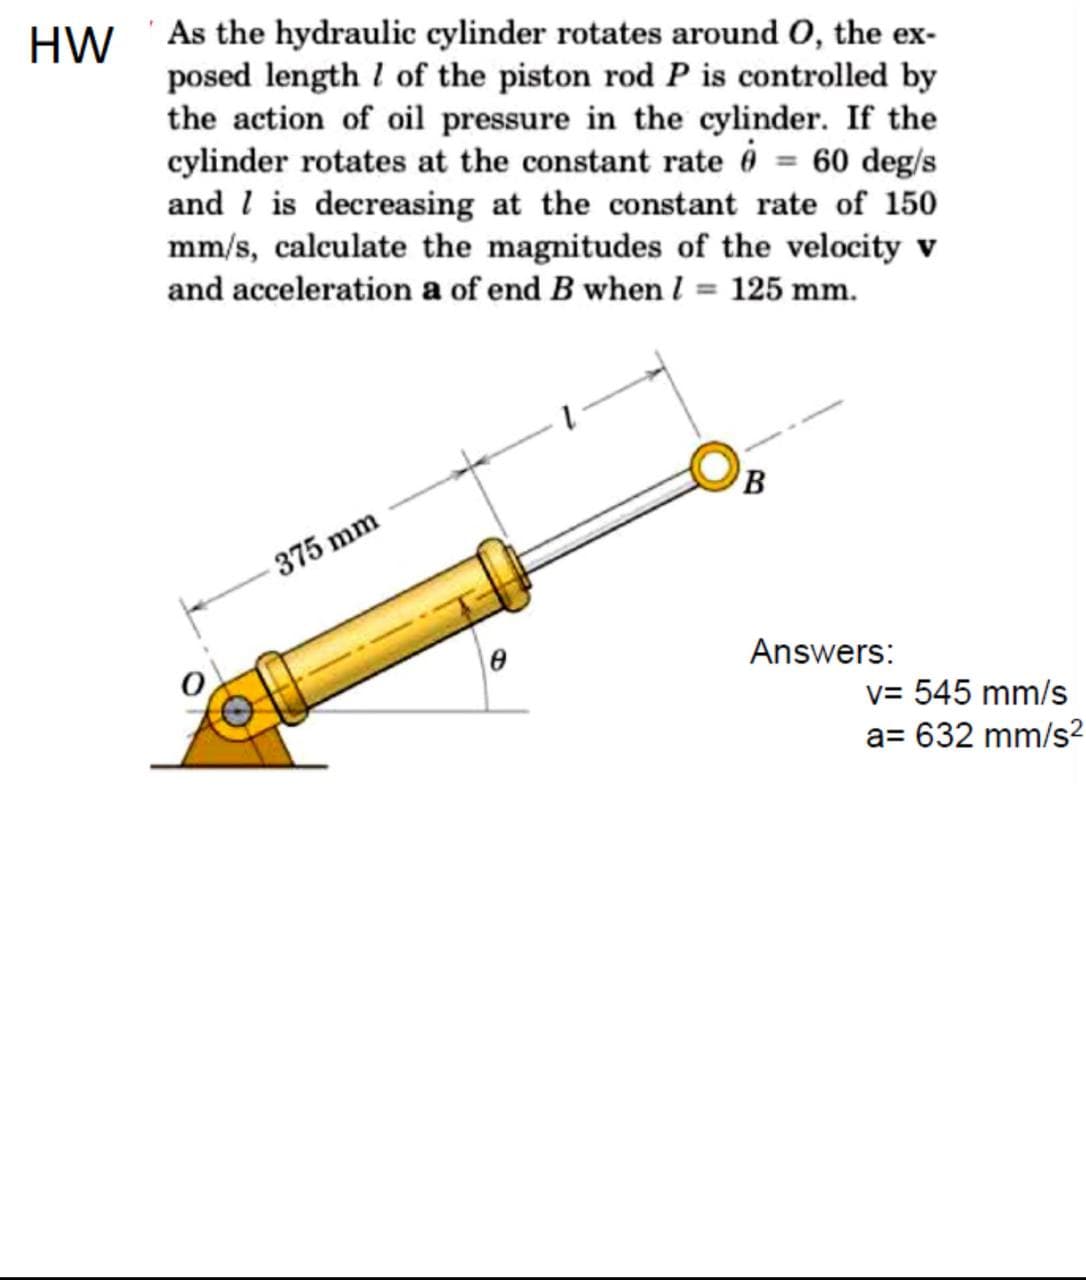 HW 'As the hydraulic cylinder rotates around O, the ex-
posed length l of the piston rod P is controlled by
the action of oil pressure in the cylinder. If the
cylinder rotates at the constant rate 6 = 60 deg/s
and l is decreasing at the constant rate of 150
mm/s, calculate the magnitudes of the velocity v
and acceleration a of end B when l = 125 mm.
B
375 mm
Answers:
v= 545 mm/s
a= 632 mm/s?
